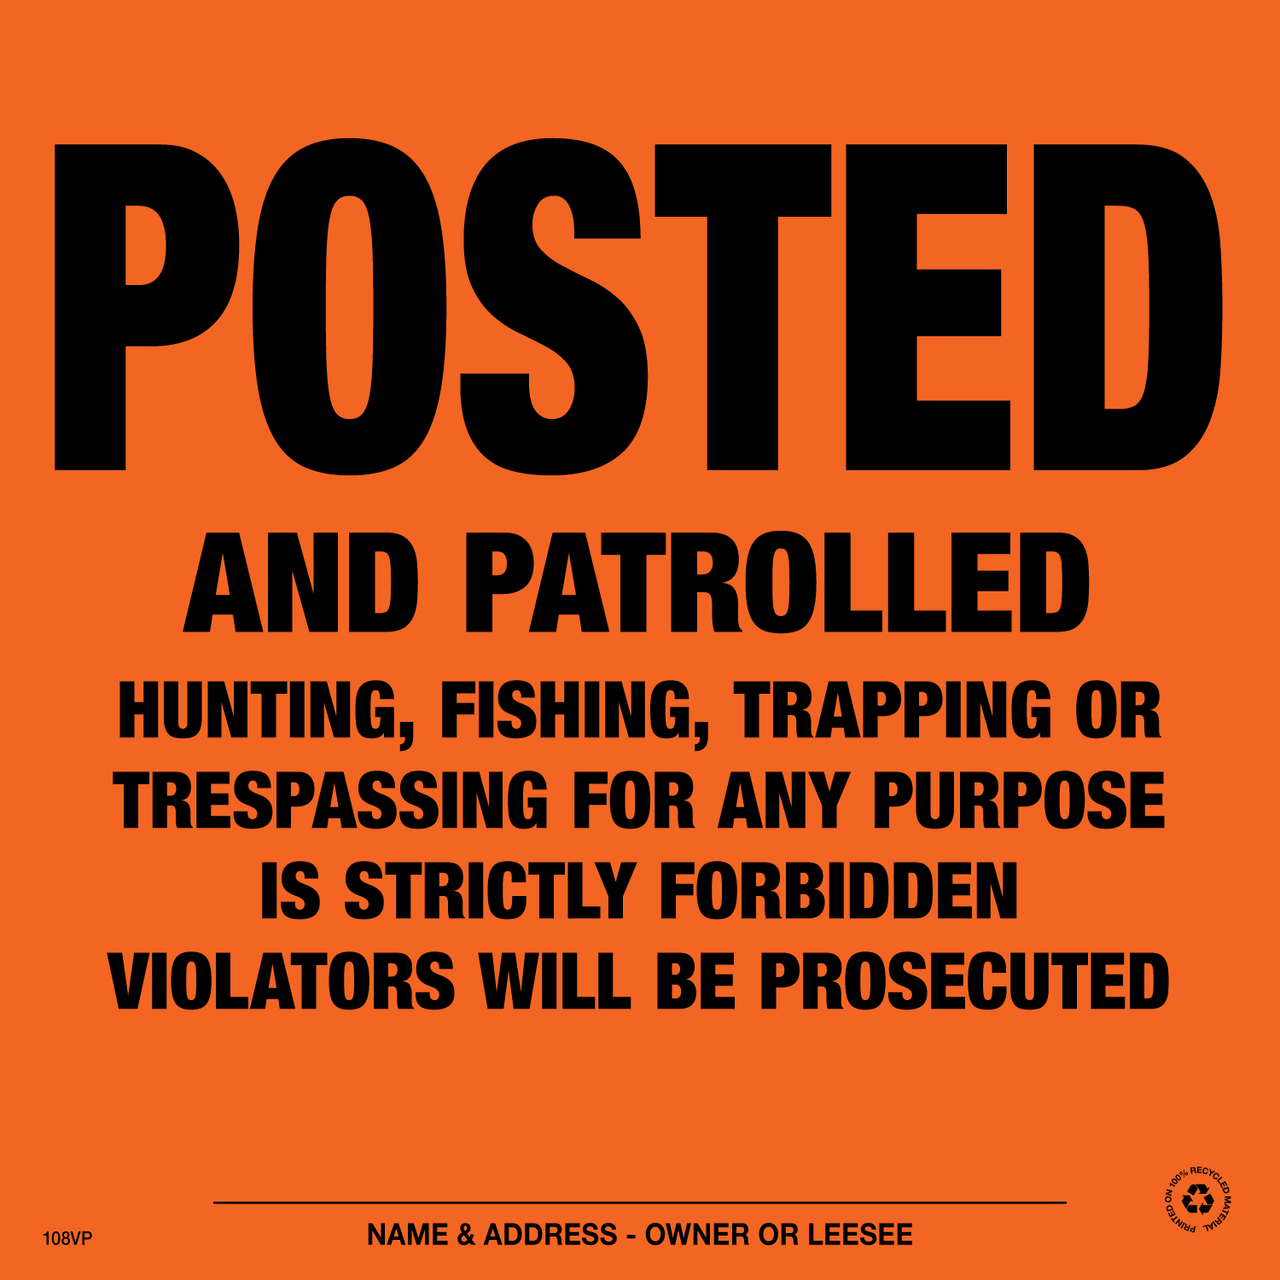 Posted and Patrolled Posted Signs - Orange Aluminum - Pack of 25